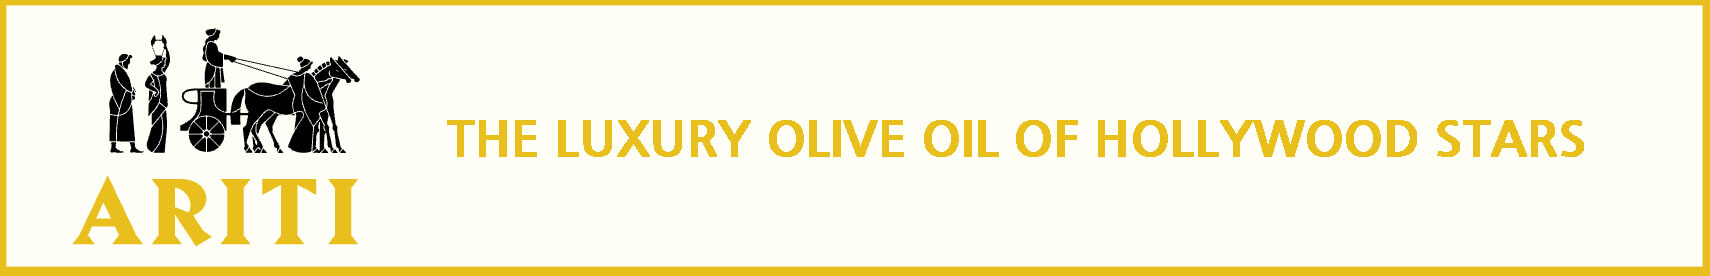 THE LUXURY OLIVE OIL OF HOLLYWOOD STARS